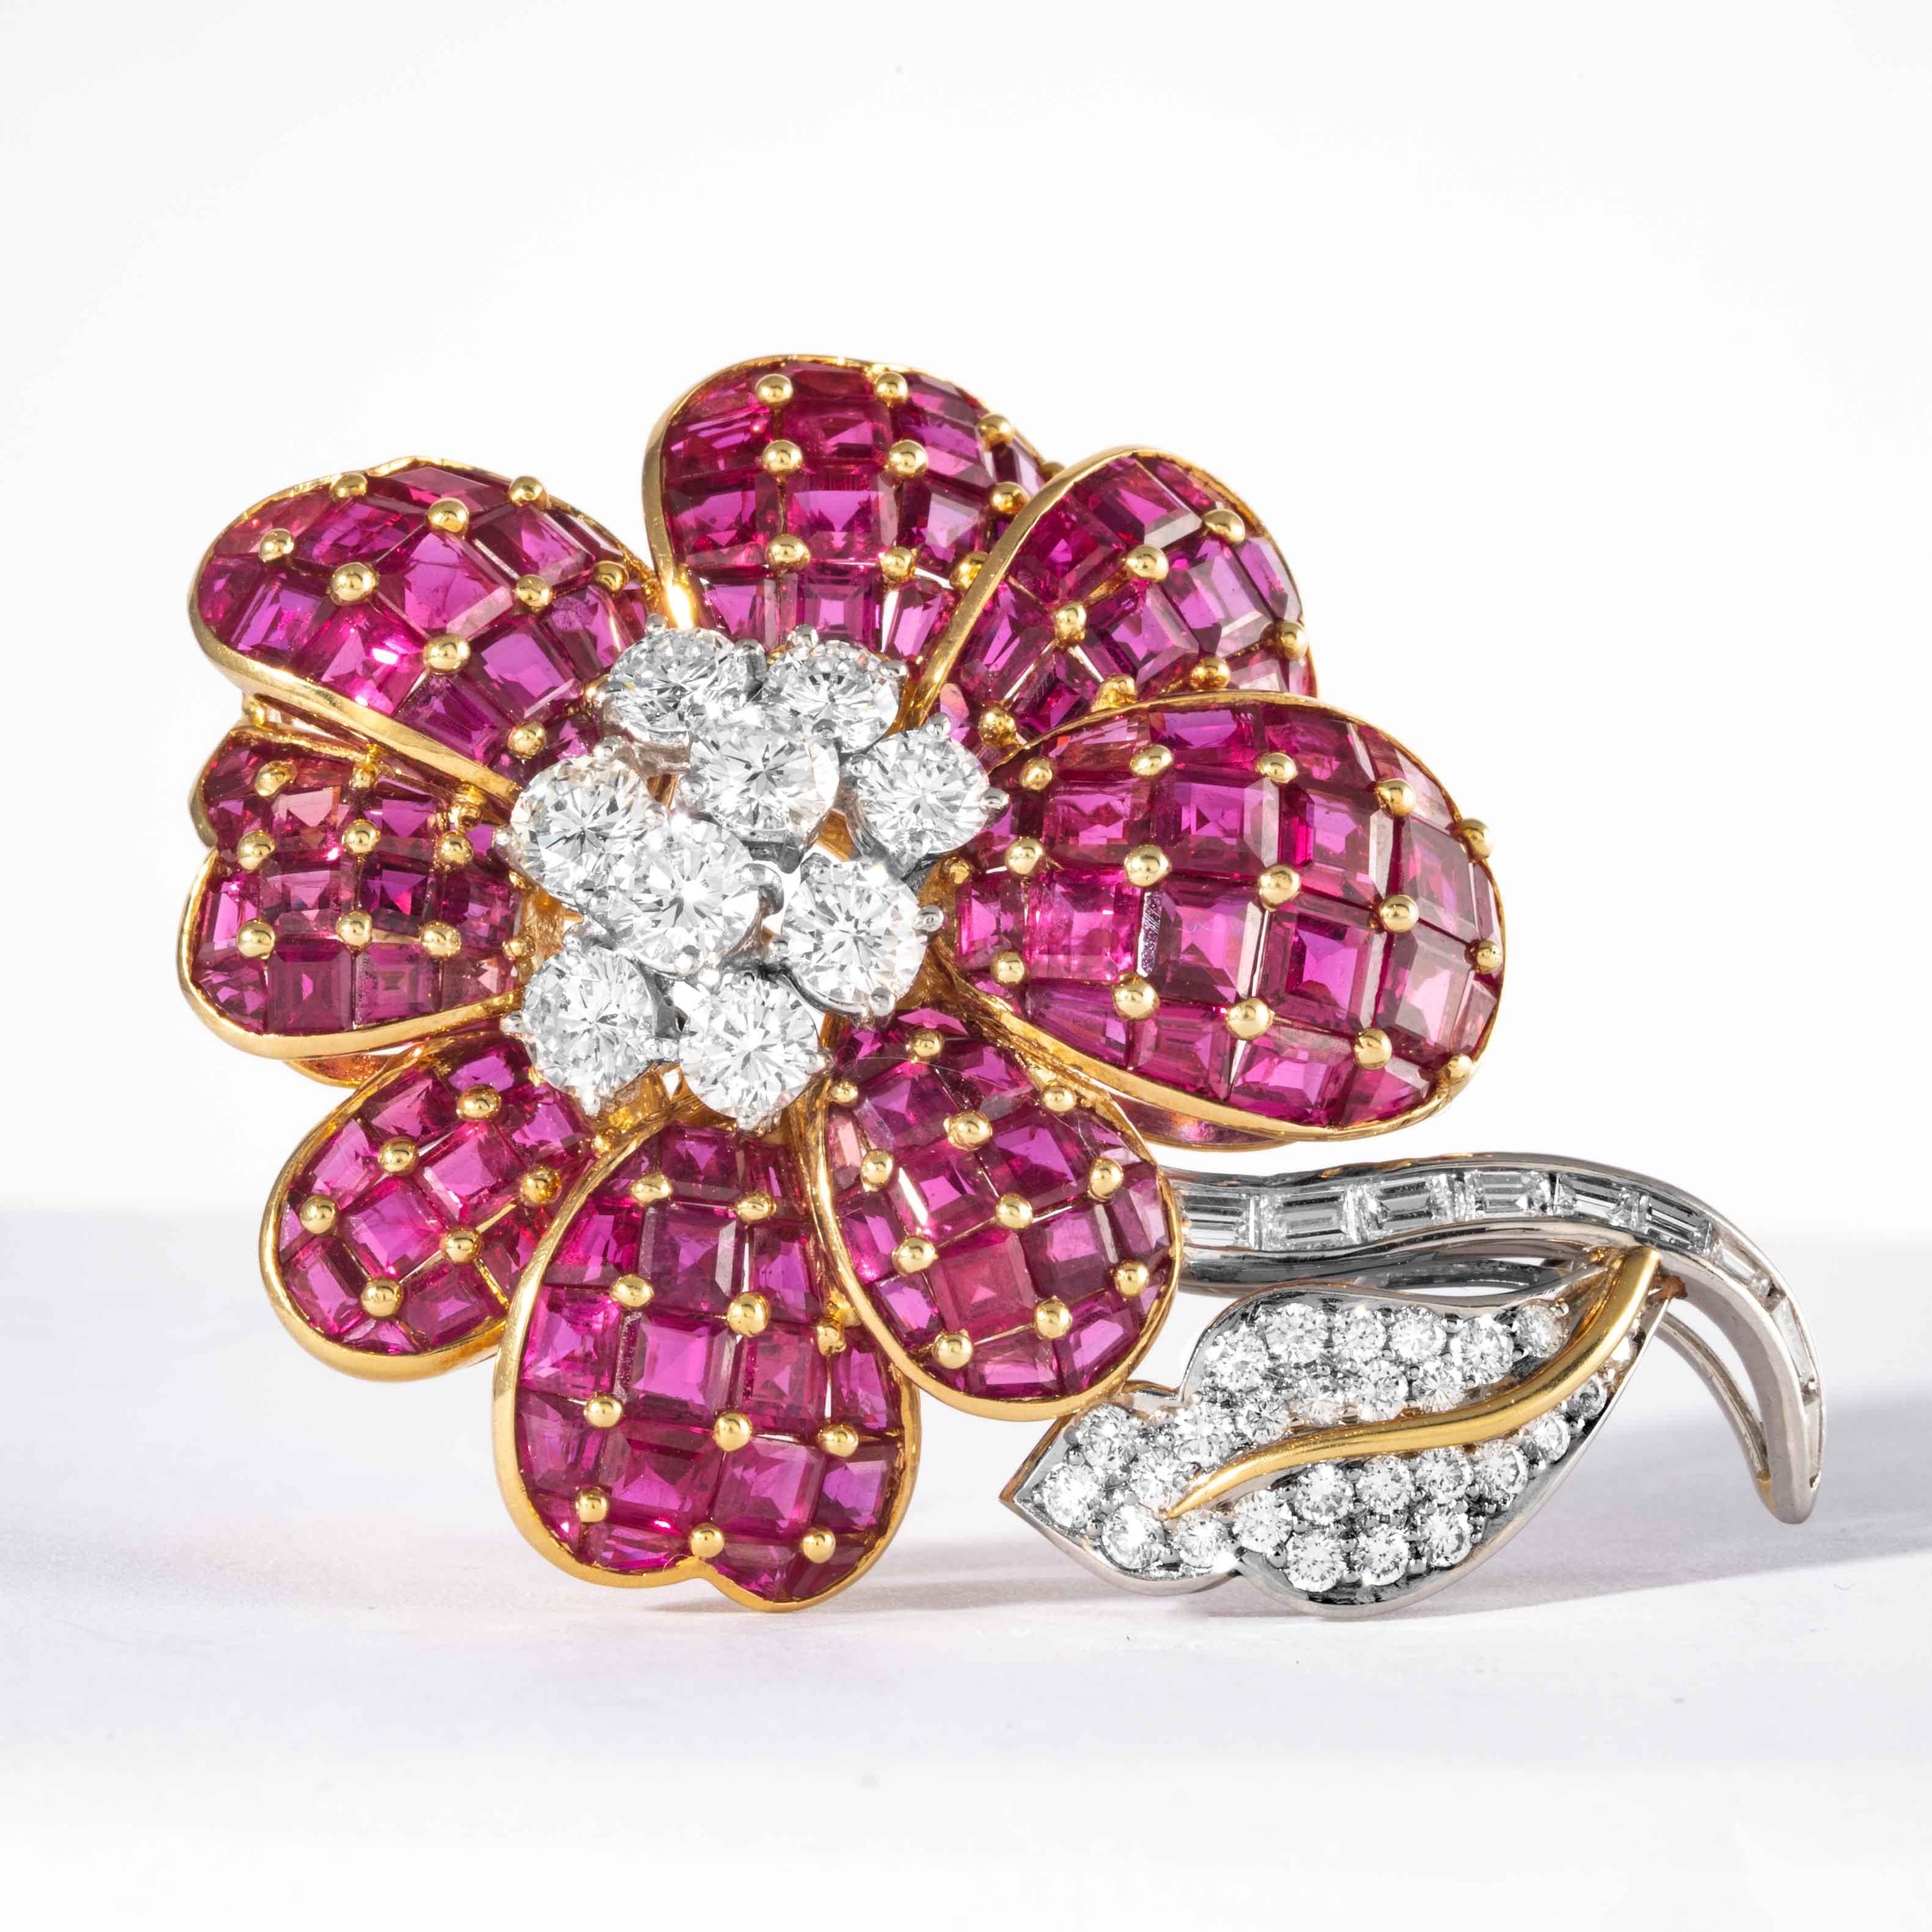 This whimsical floral motif brooch is comprised of 18 karat yellow and white gold and consists of step-cut rubies having an estimated total weight of 13 carats, 7 round brilliant diamonds in a blossoming flower design with baguette and round